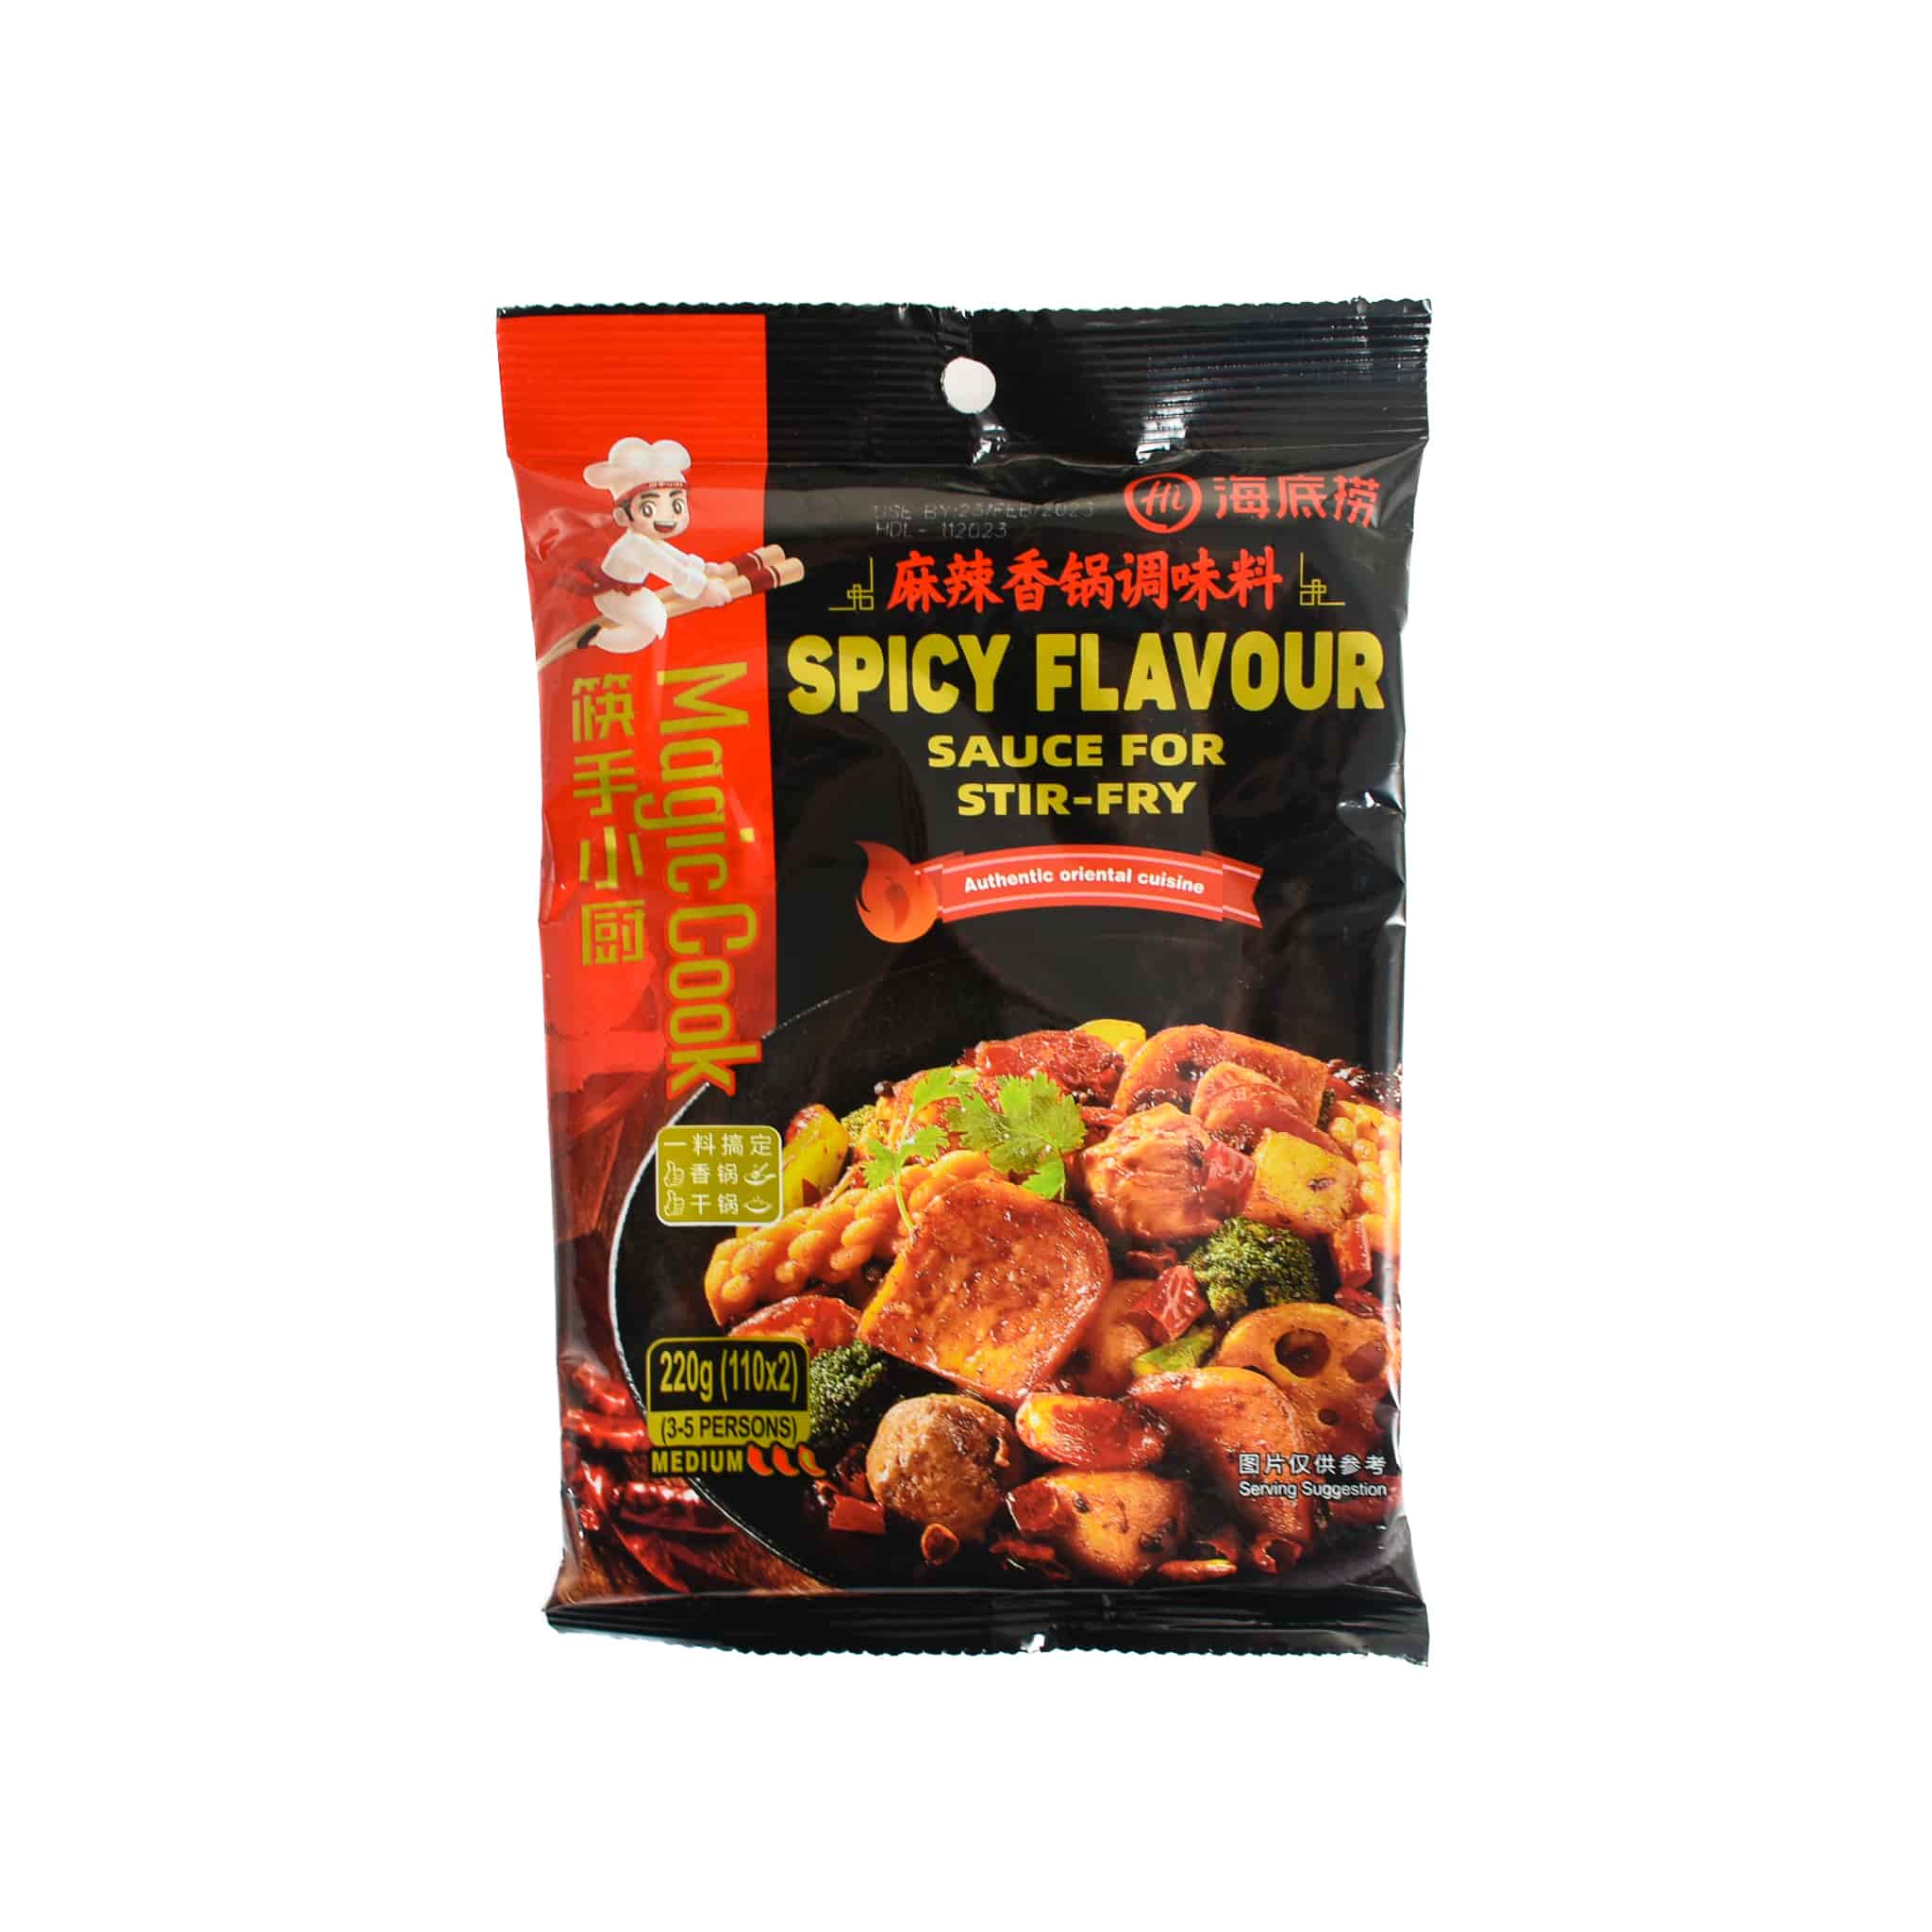 Spicy Hot Sauce for Stir Fry, 220g